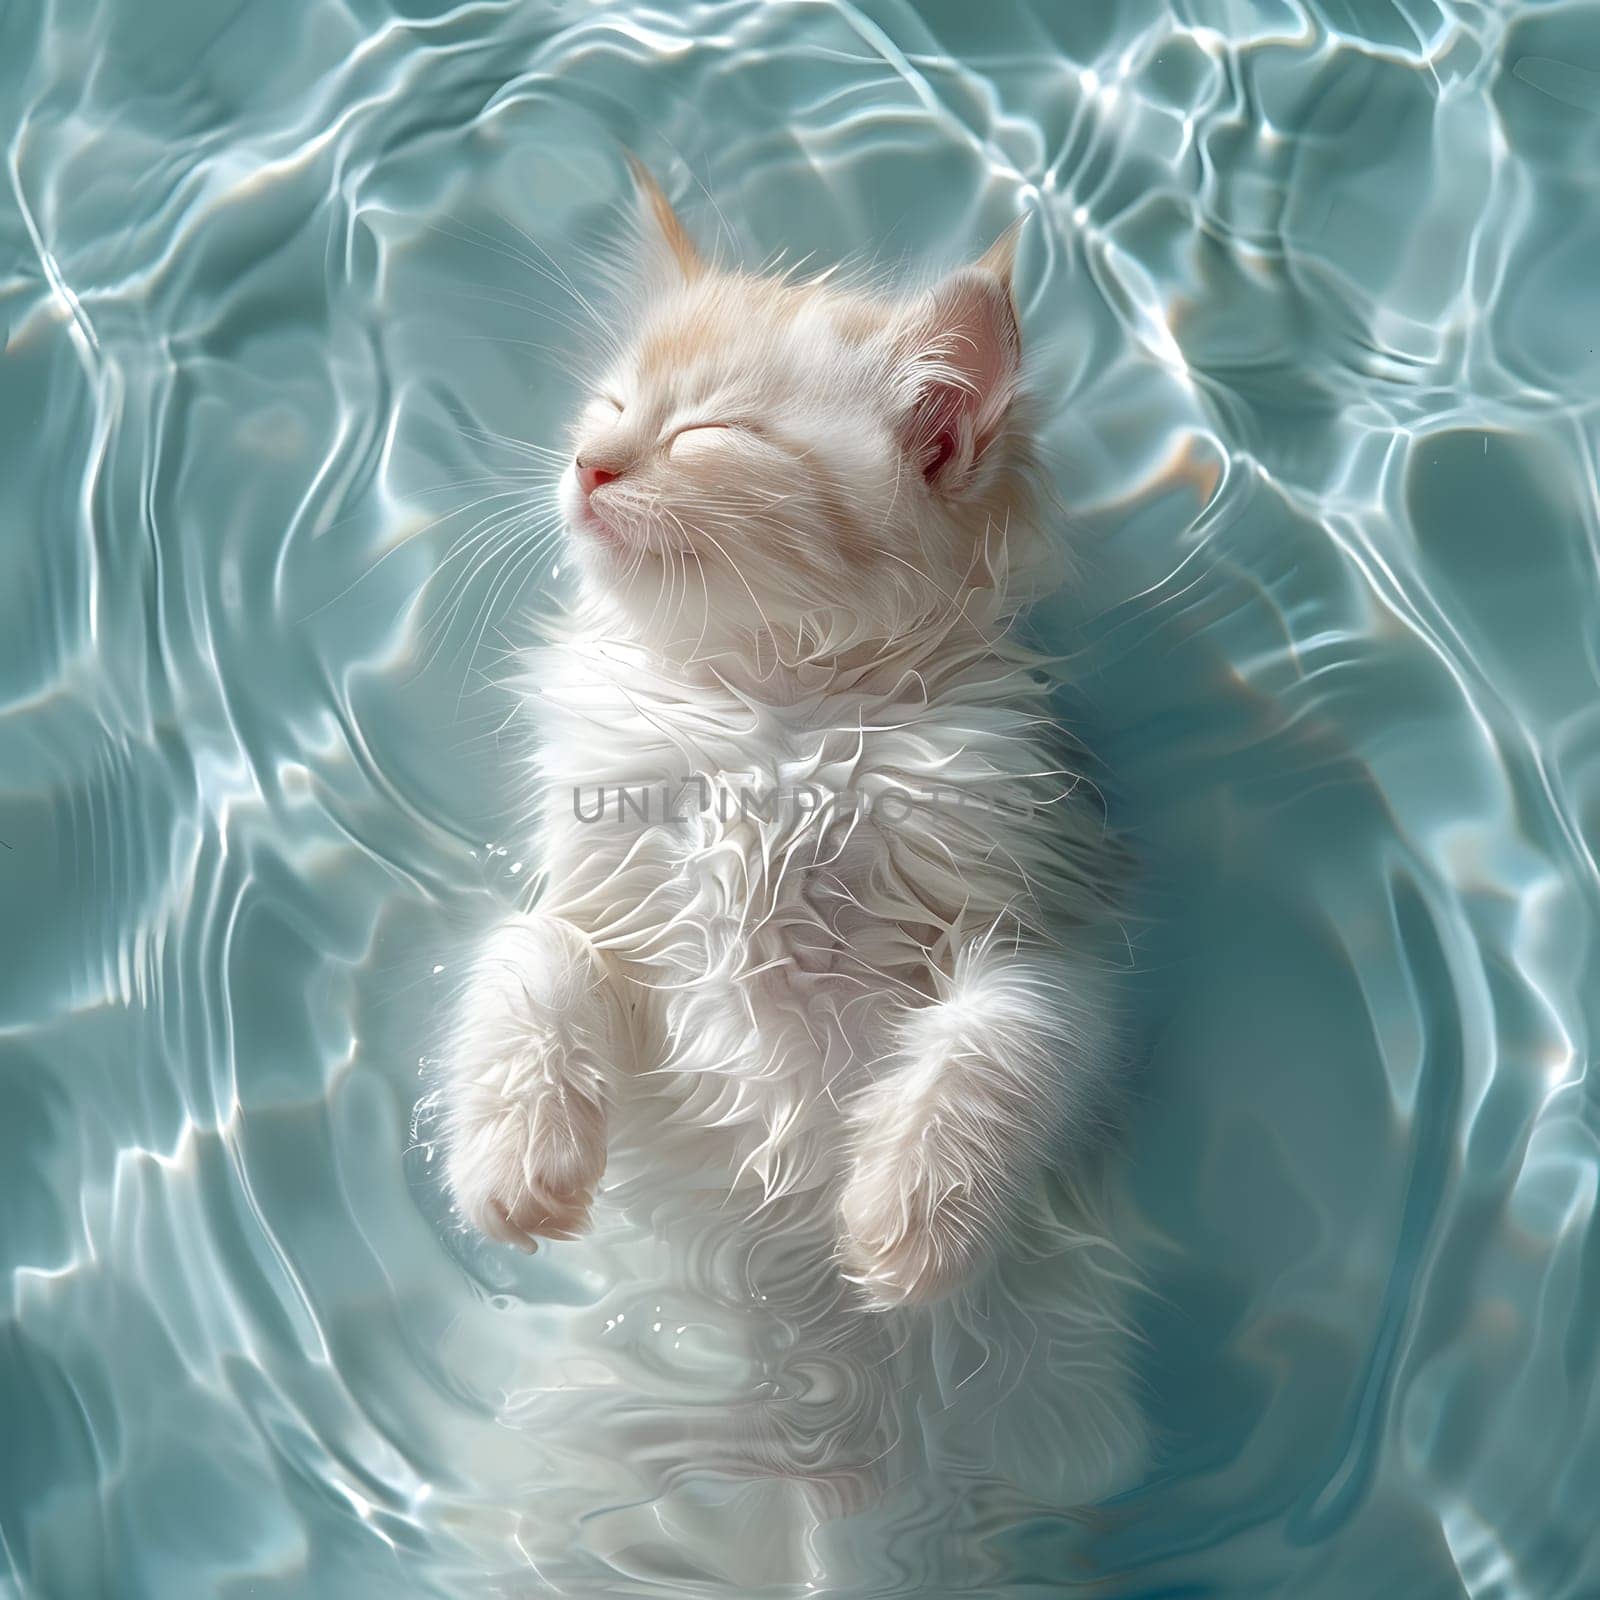 A Felidae kitten is peacefully floating in the liquid with closed eyes by Nadtochiy